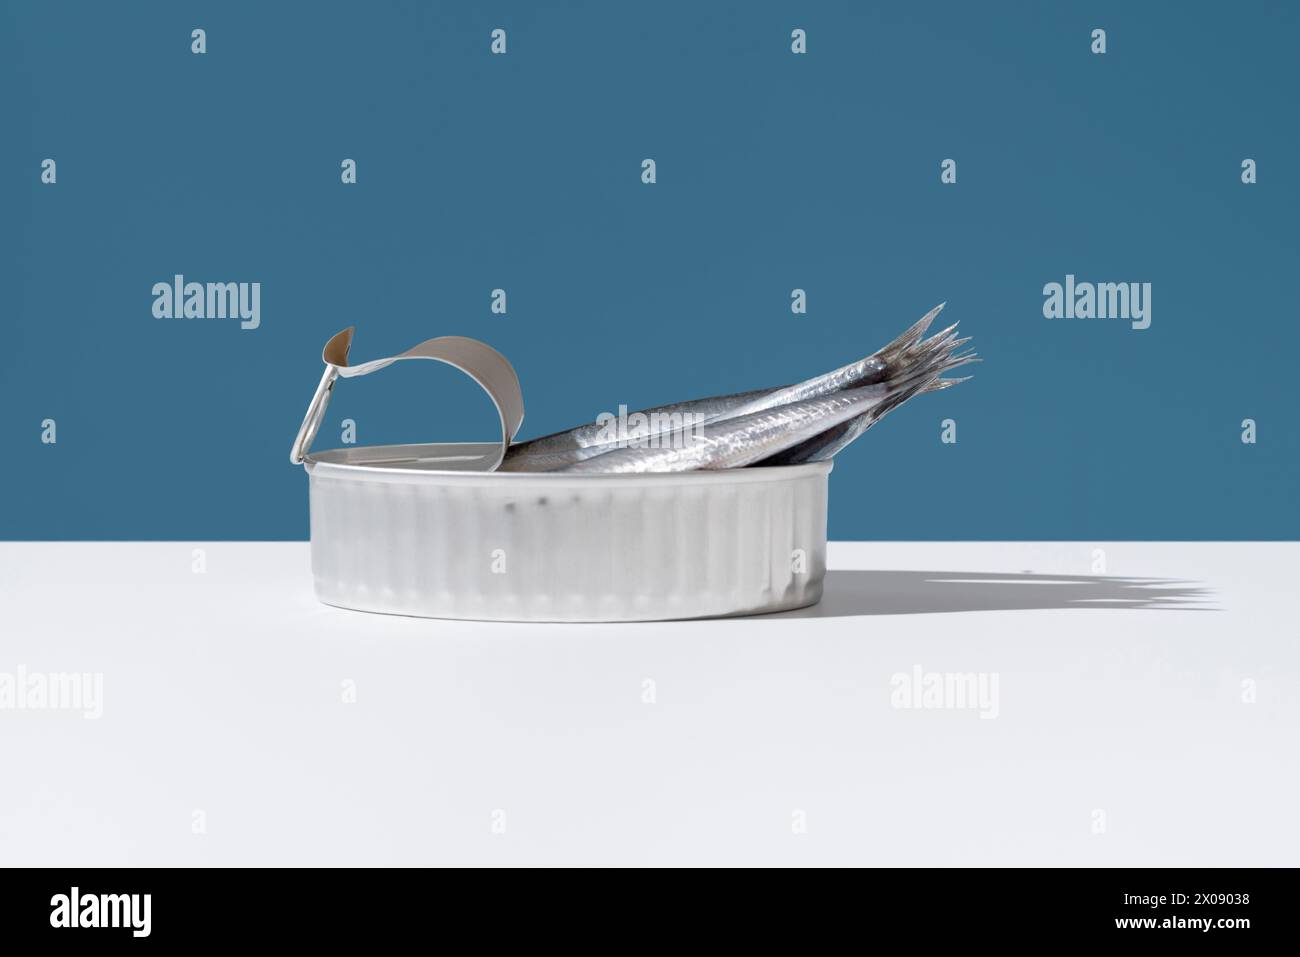 Fresh anchovies extend from an open can, set against a crisp blue background, illustrating a blend of natural and industrial themes Stock Photo